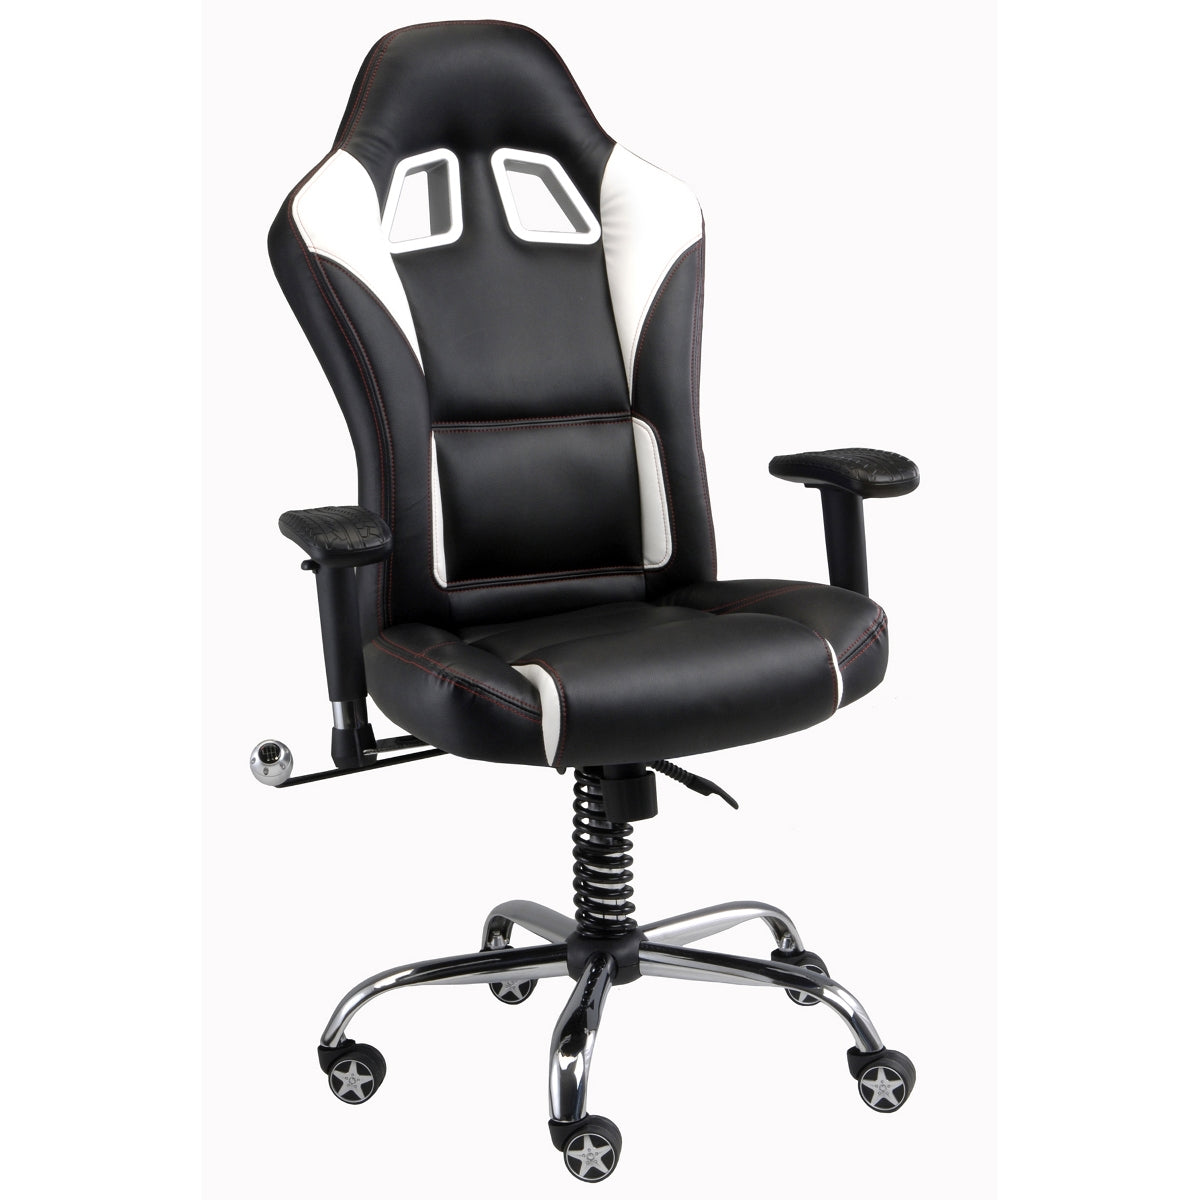 Pitstop SE BLACK High Back Automotive Themed Office Chair